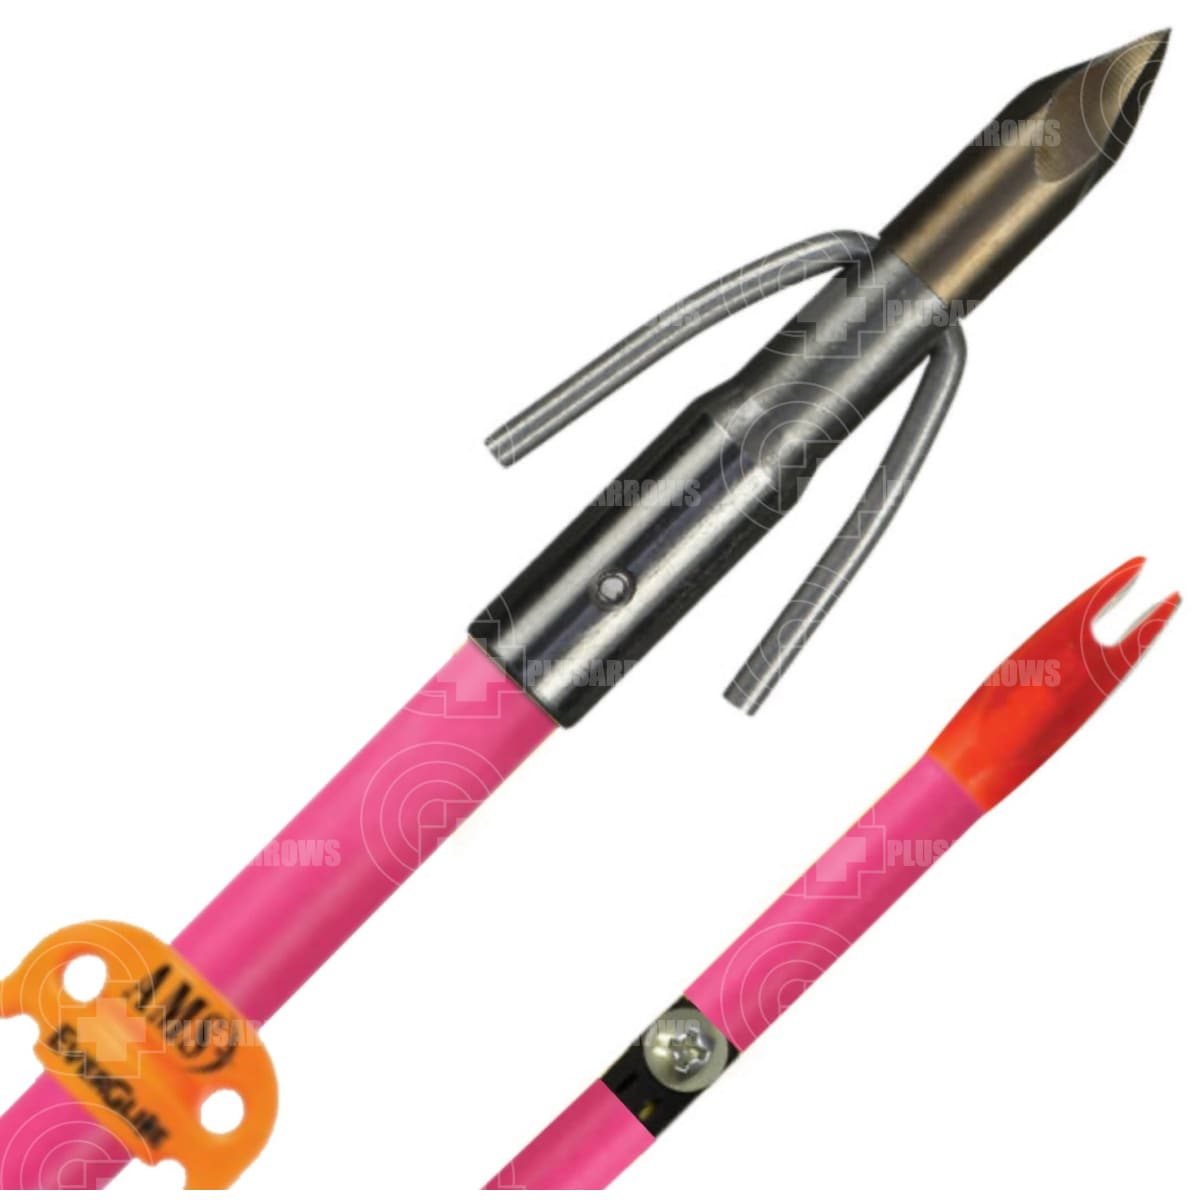 https://plusarrows.com/cdn/shop/files/ams-pink-bow-fishing-arrow-with-point-and-safety-slide-670.jpg?v=1701194019